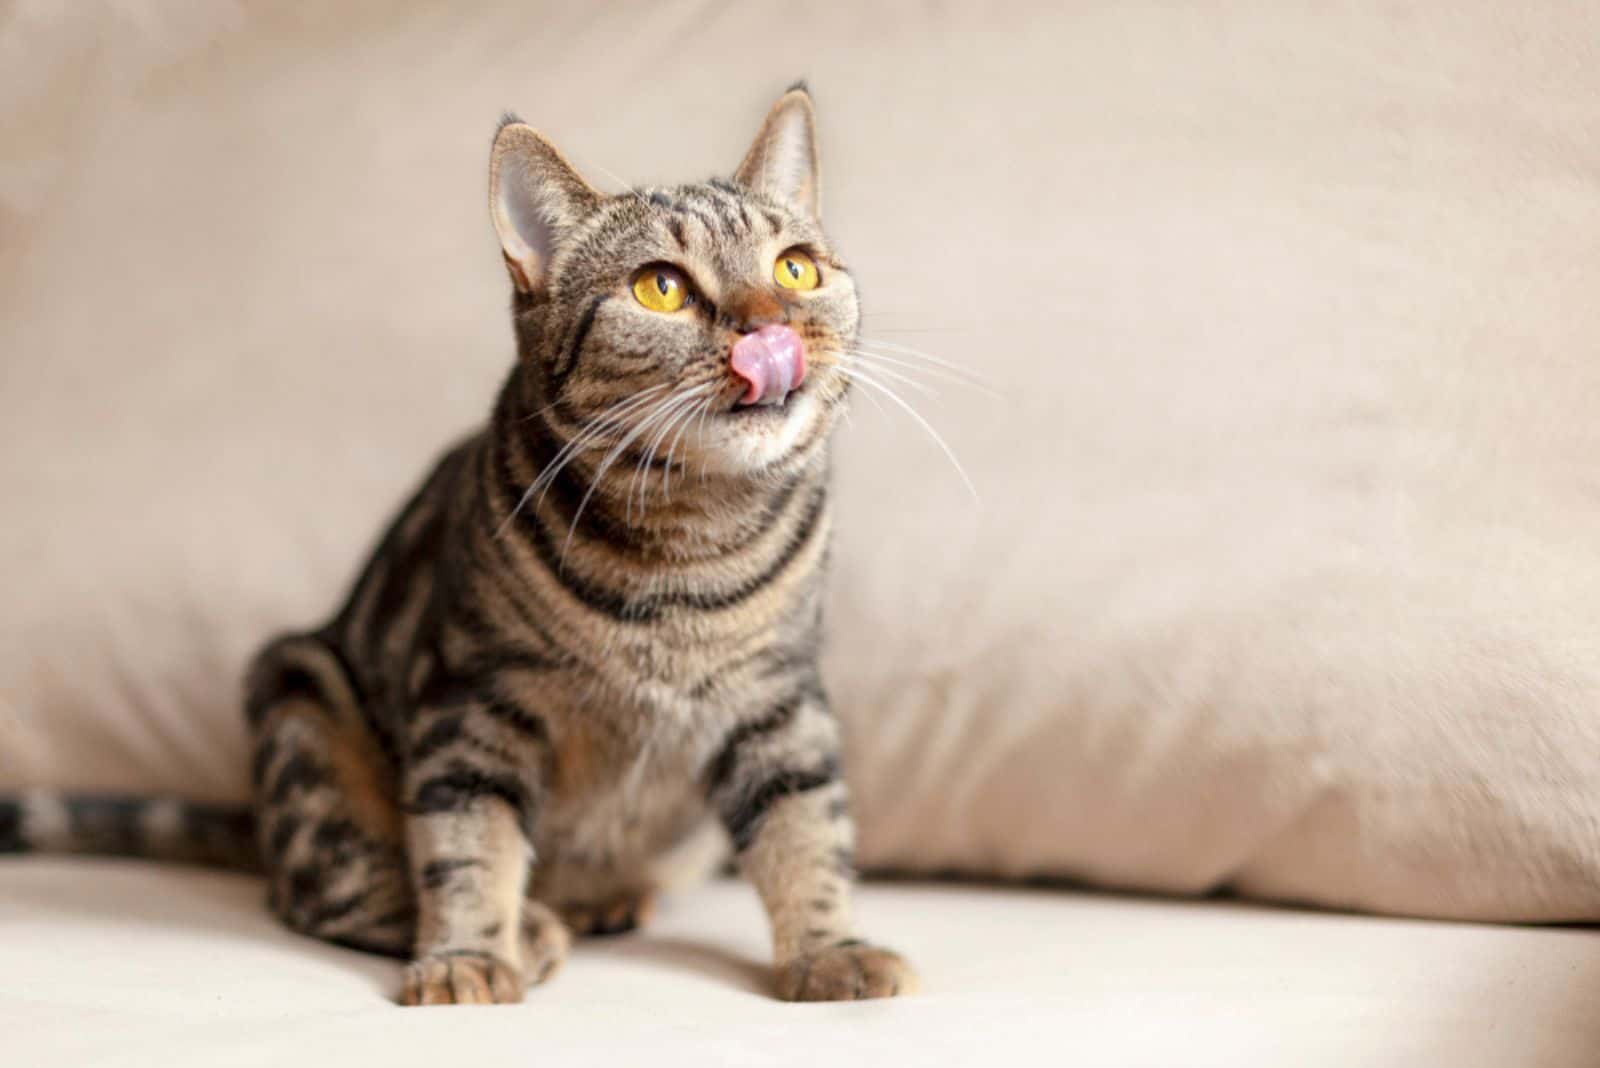 cat with bright yellow eyes sits on the beige sofa licking with tongue